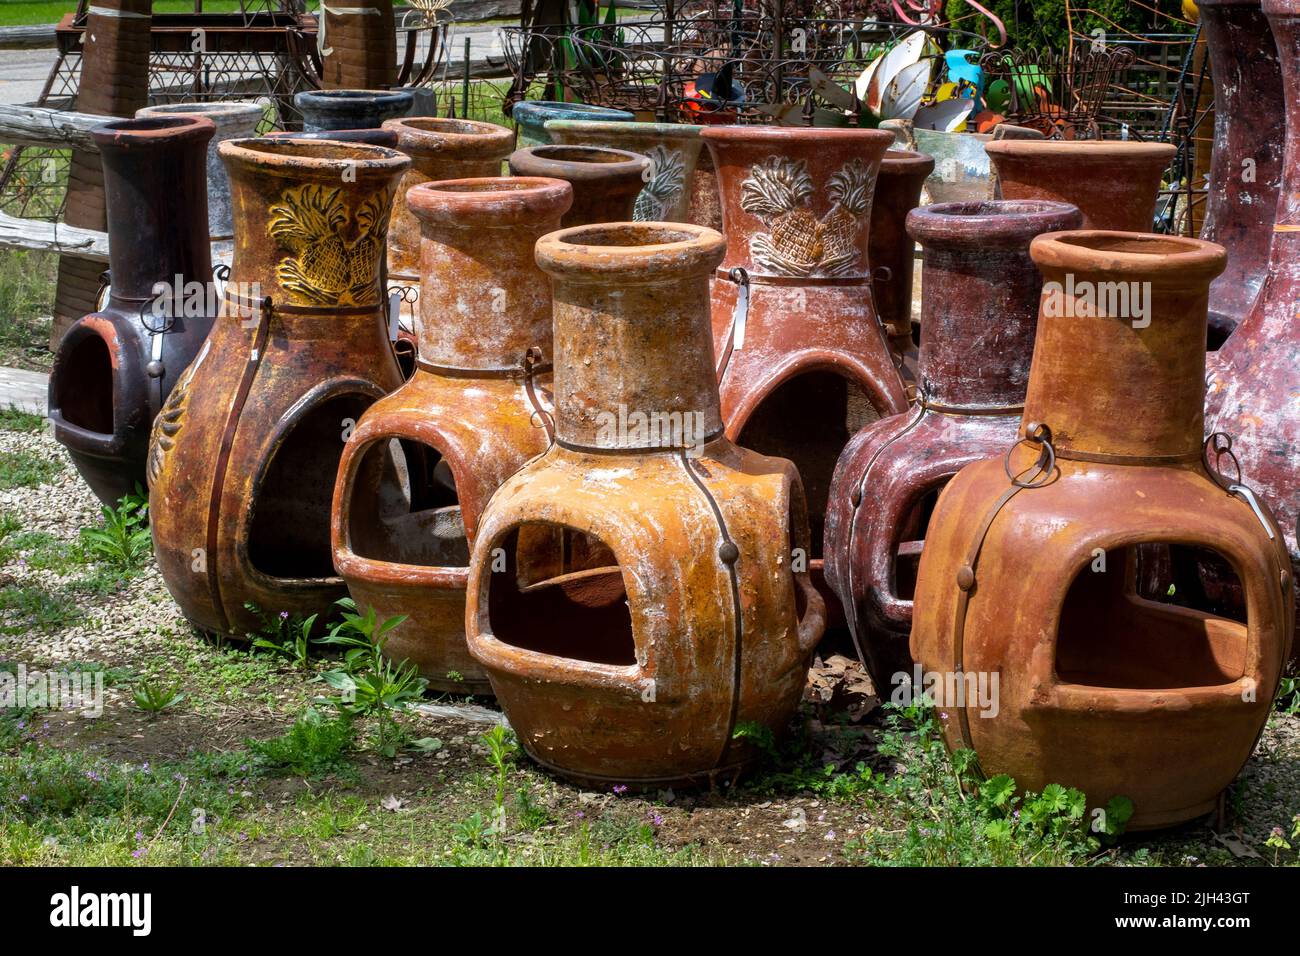 Mexican chimeneas are displayed at an outdoor market, a unique clay fireplace that comes from Mexico Stock Photo